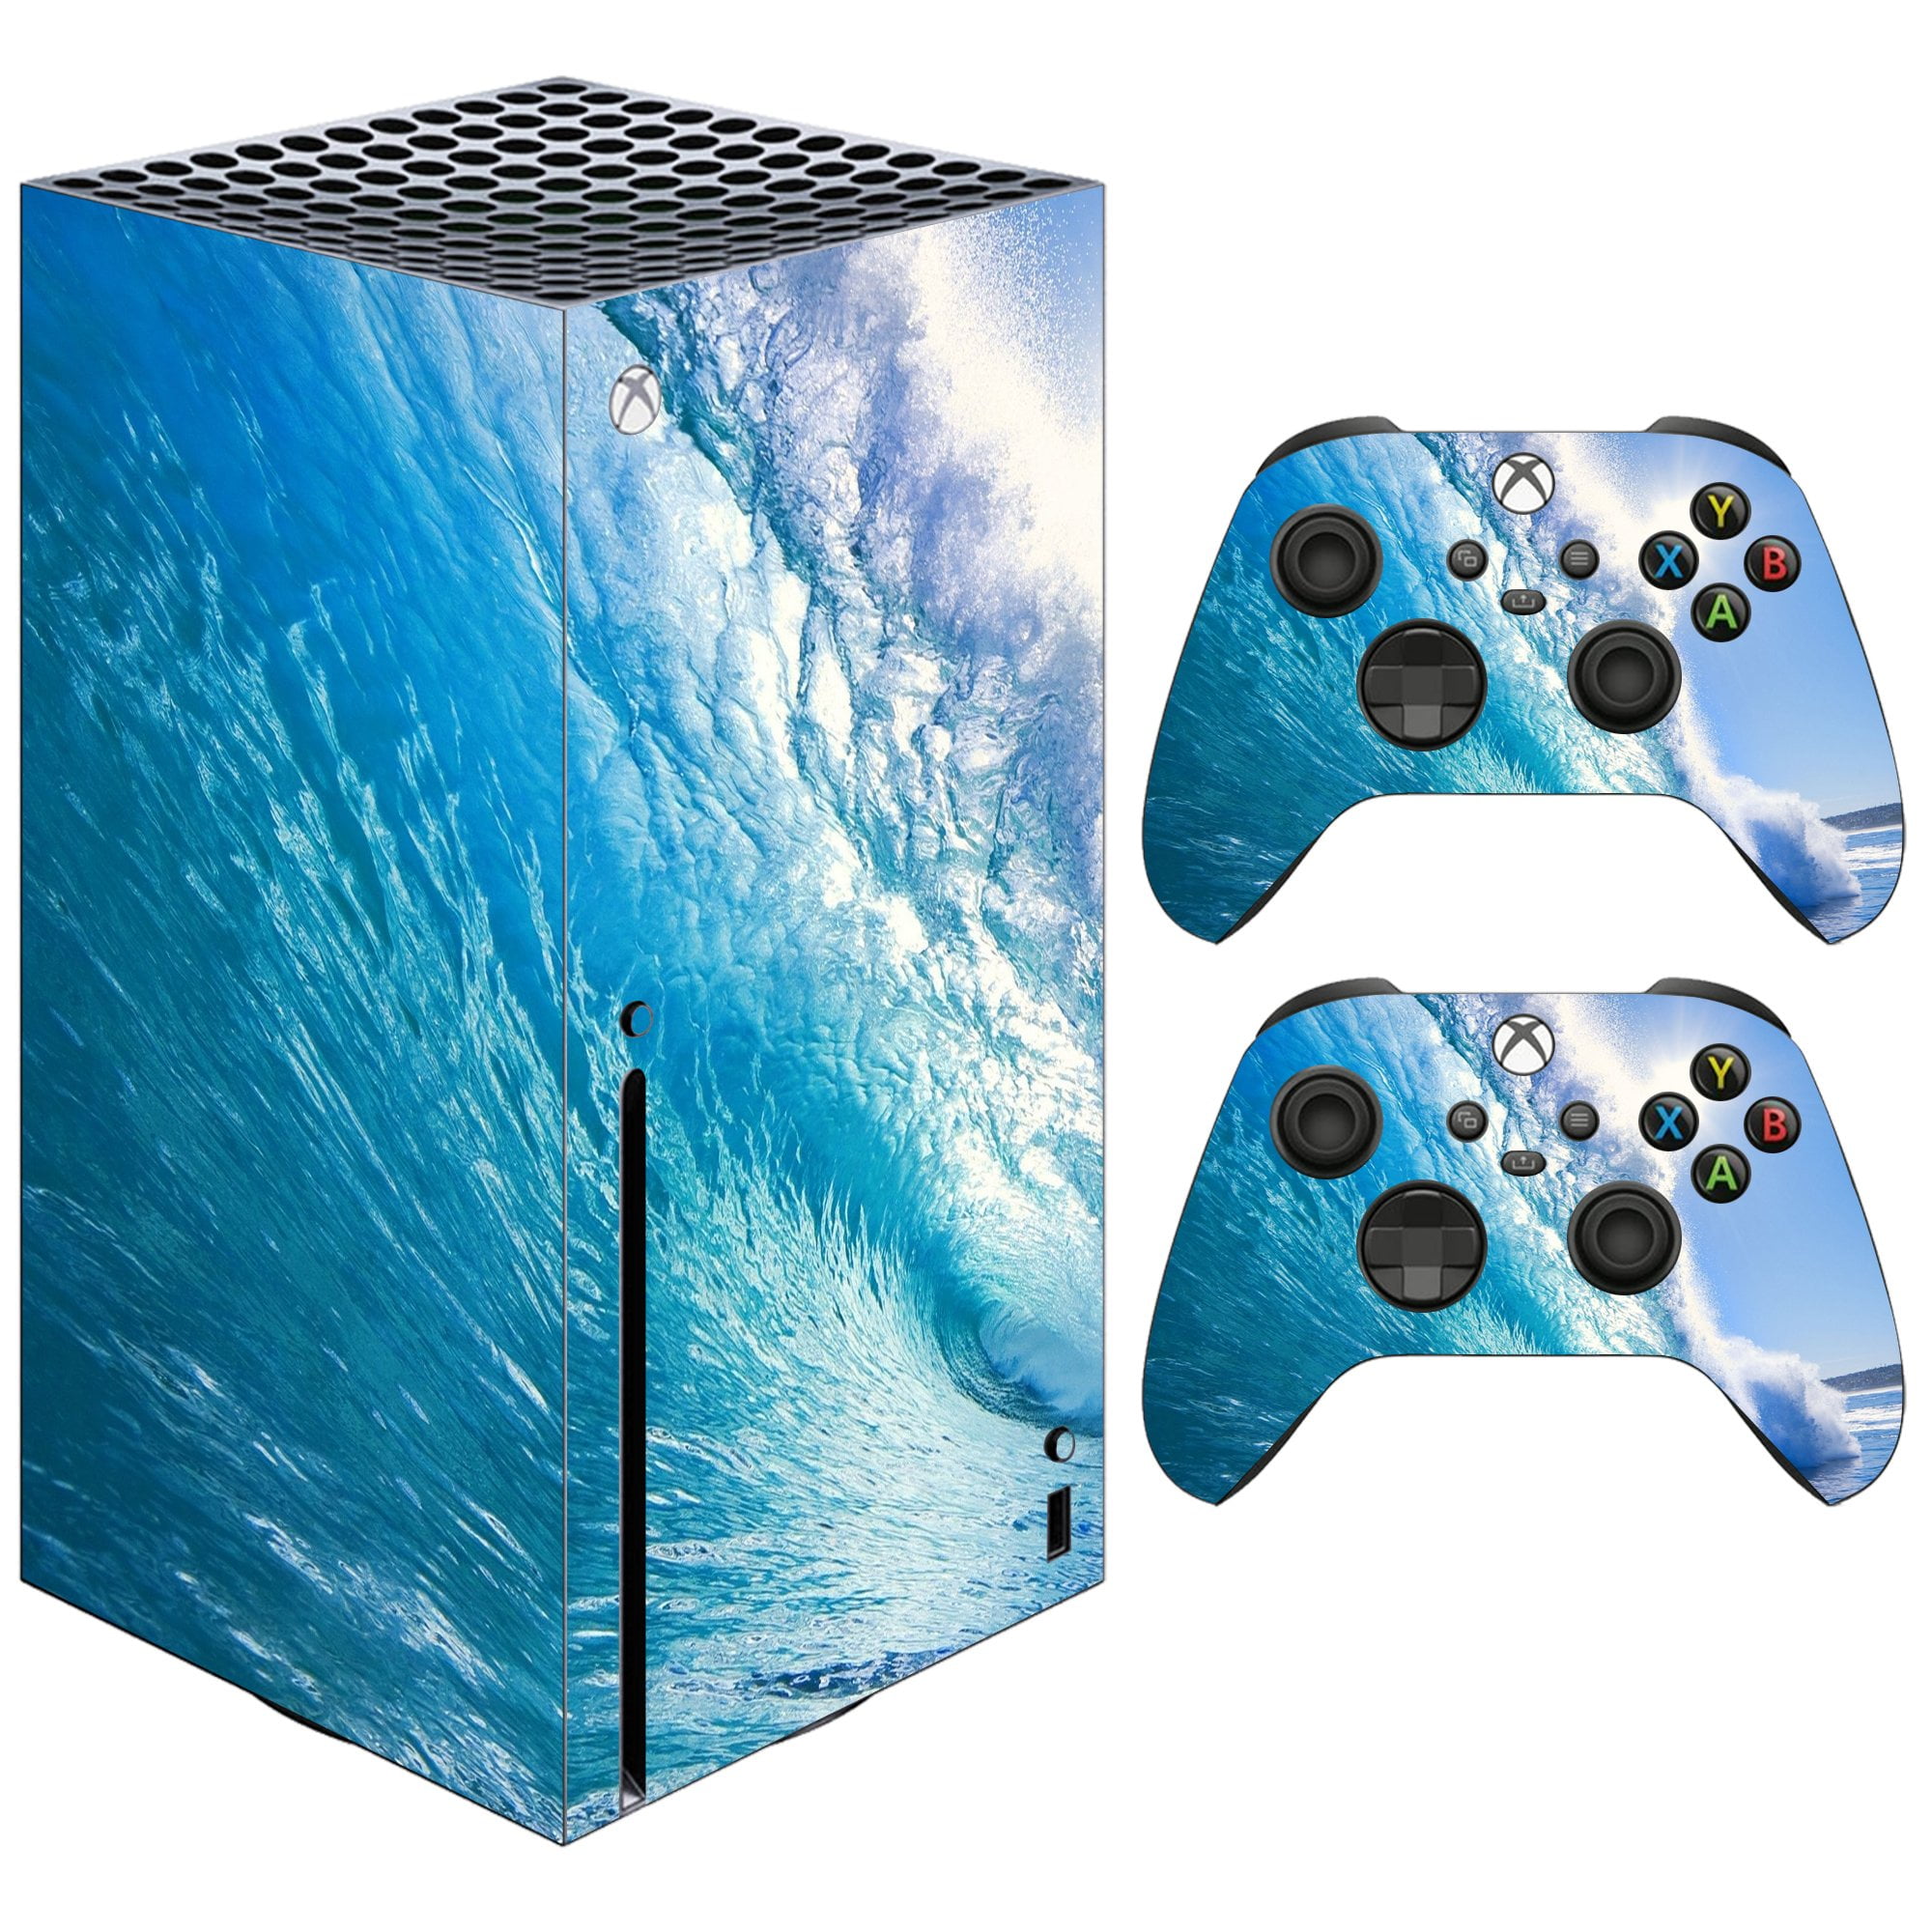 VWAQ Ocean Wave Skin For Xbox Series X Console and